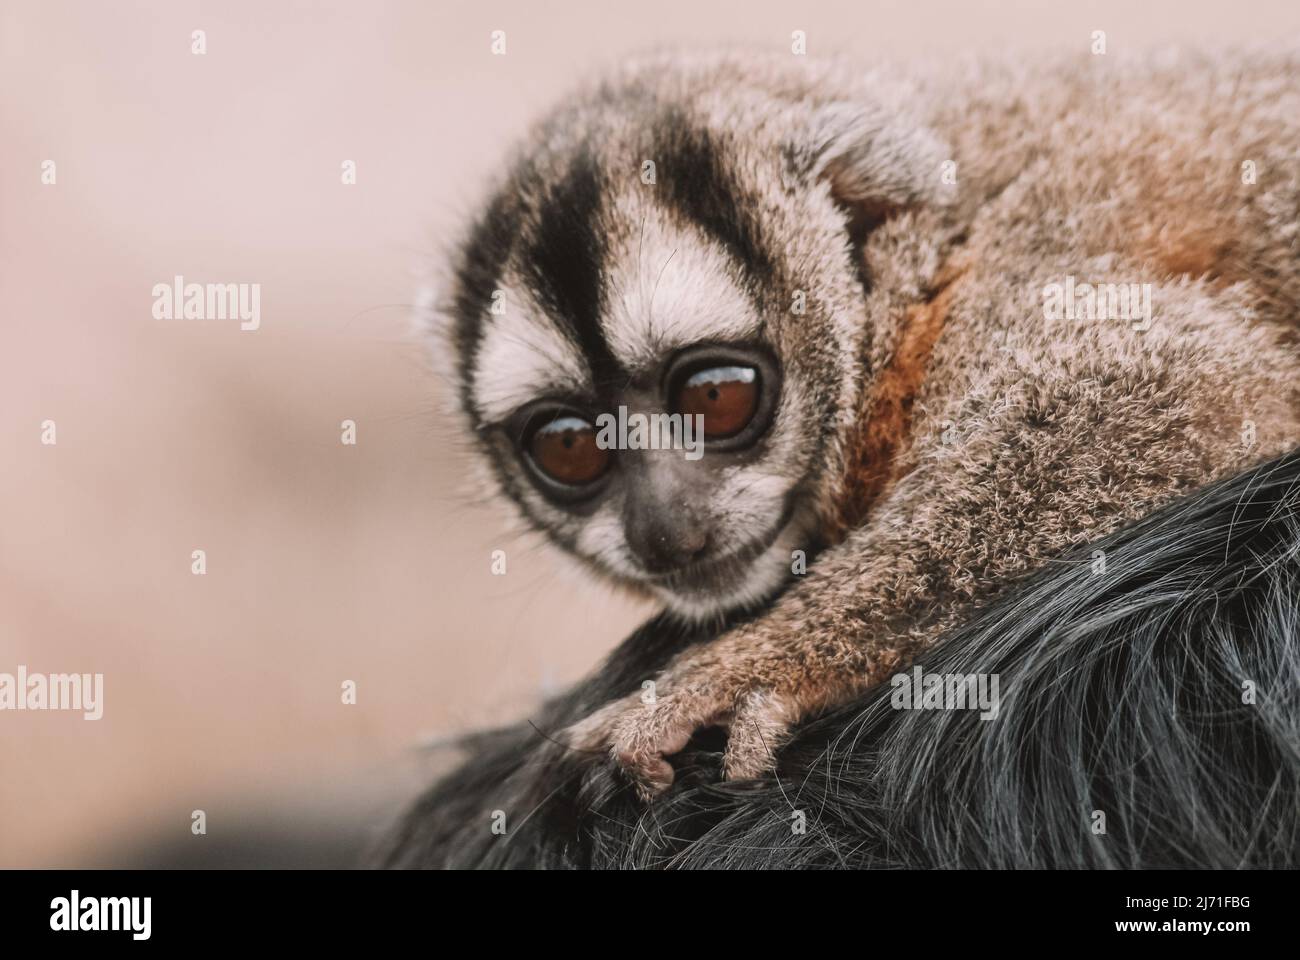 Specimen of night monkey, also known as owl monkey or douroucoulis, nocturnal New World monkey with big eyes of the genus Aotus of the family Aotidae Stock Photo